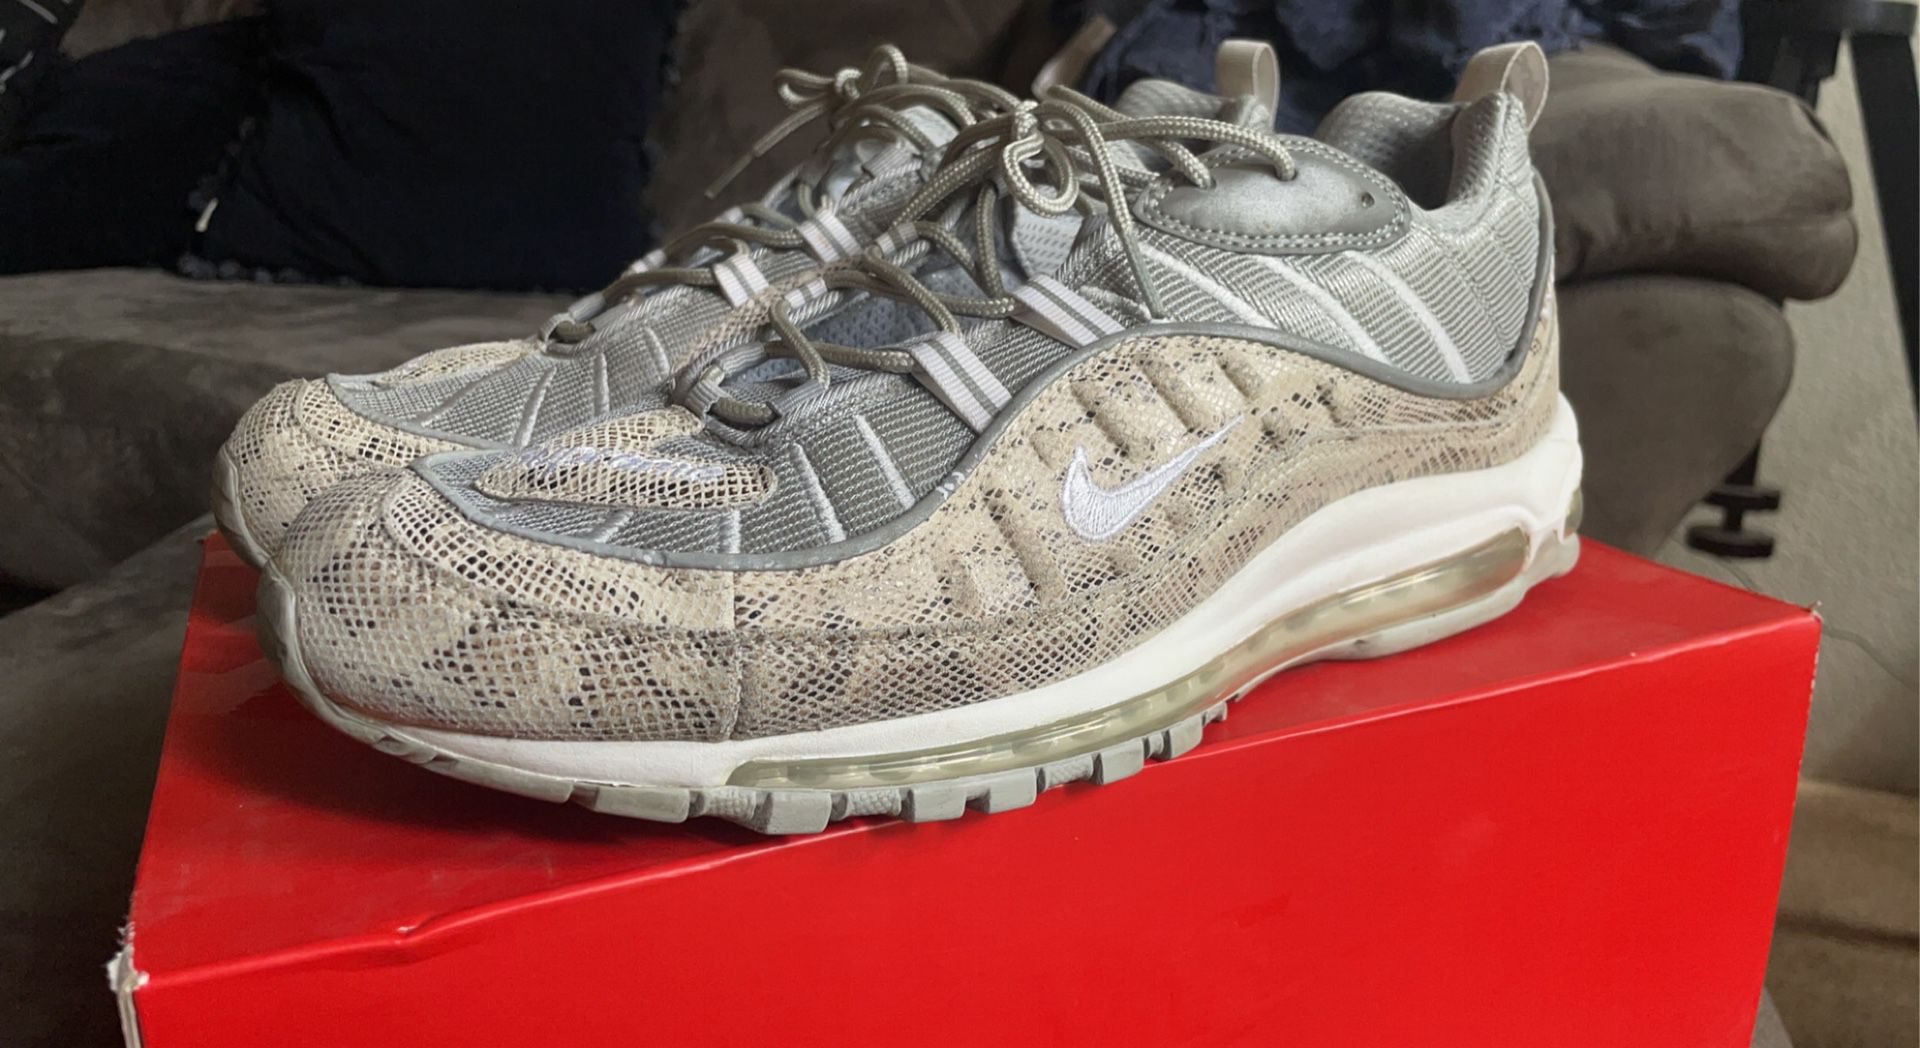 Grens geest In tegenspraak Supreme x Nike Air Max 98 Snakeskin Size 13 Great for Sale in Sacramento,  CA - OfferUp